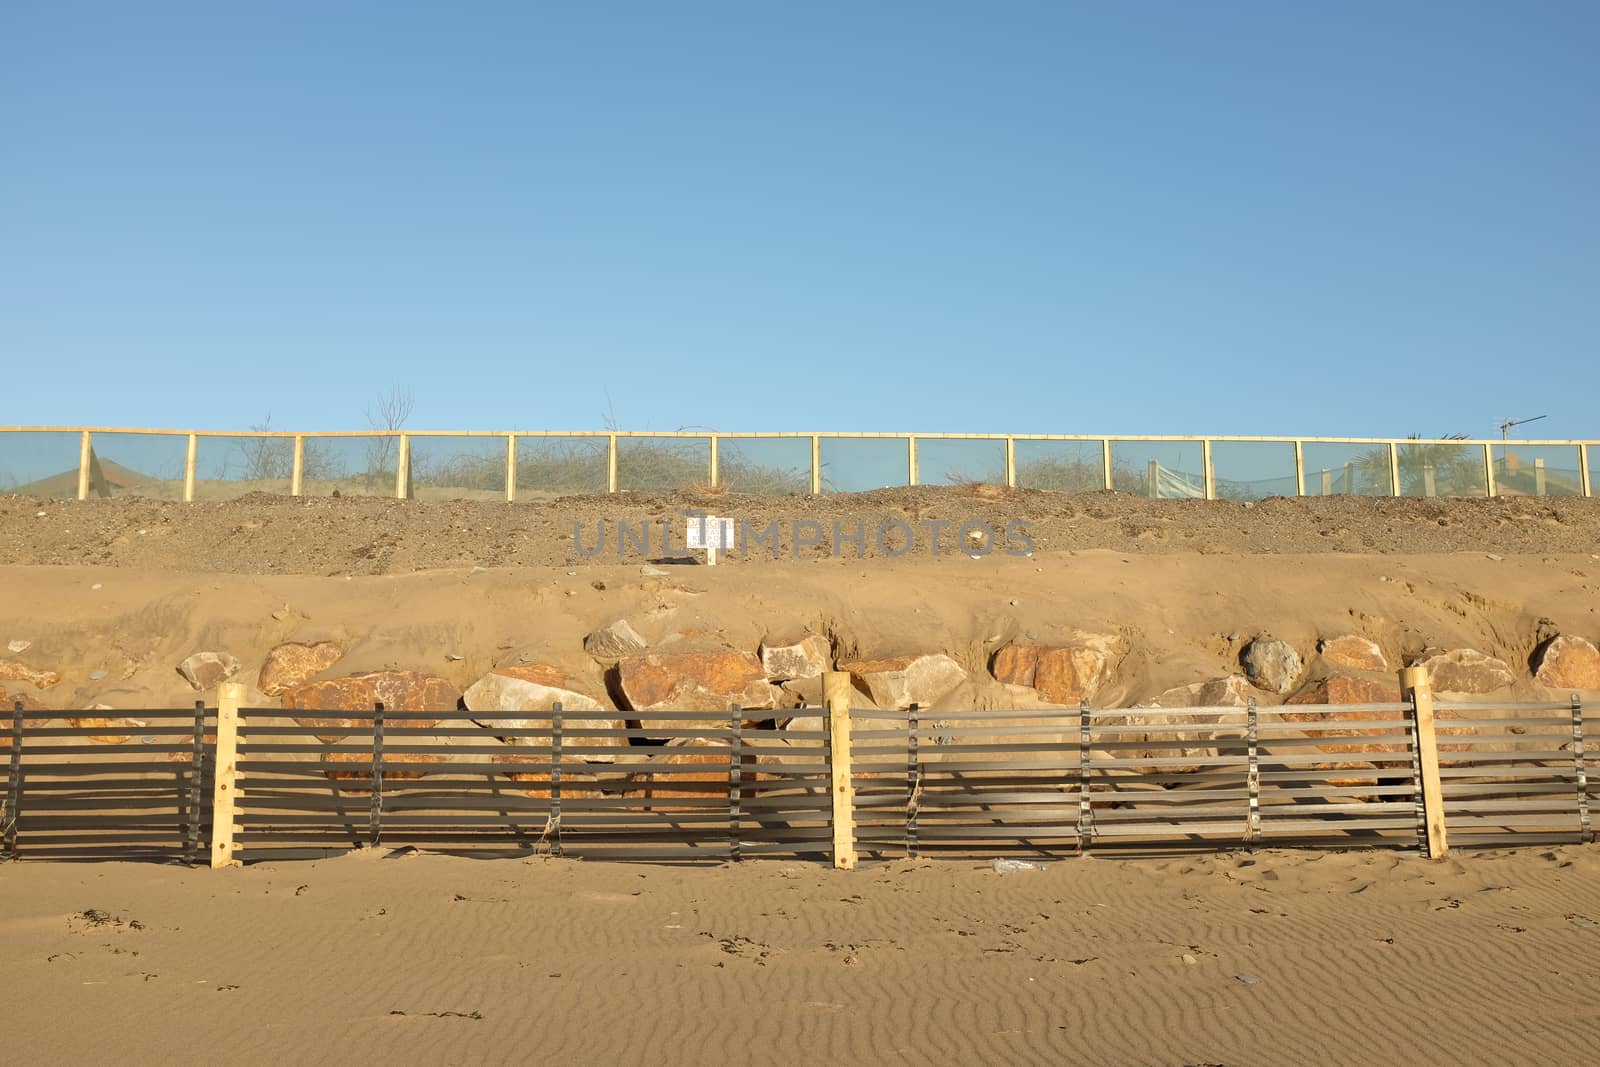 An area of constructed sand dune with a sand drift fence on wooden posts in front of a row of large rocks banked up with sand, a danger sign and a protective fence on top.